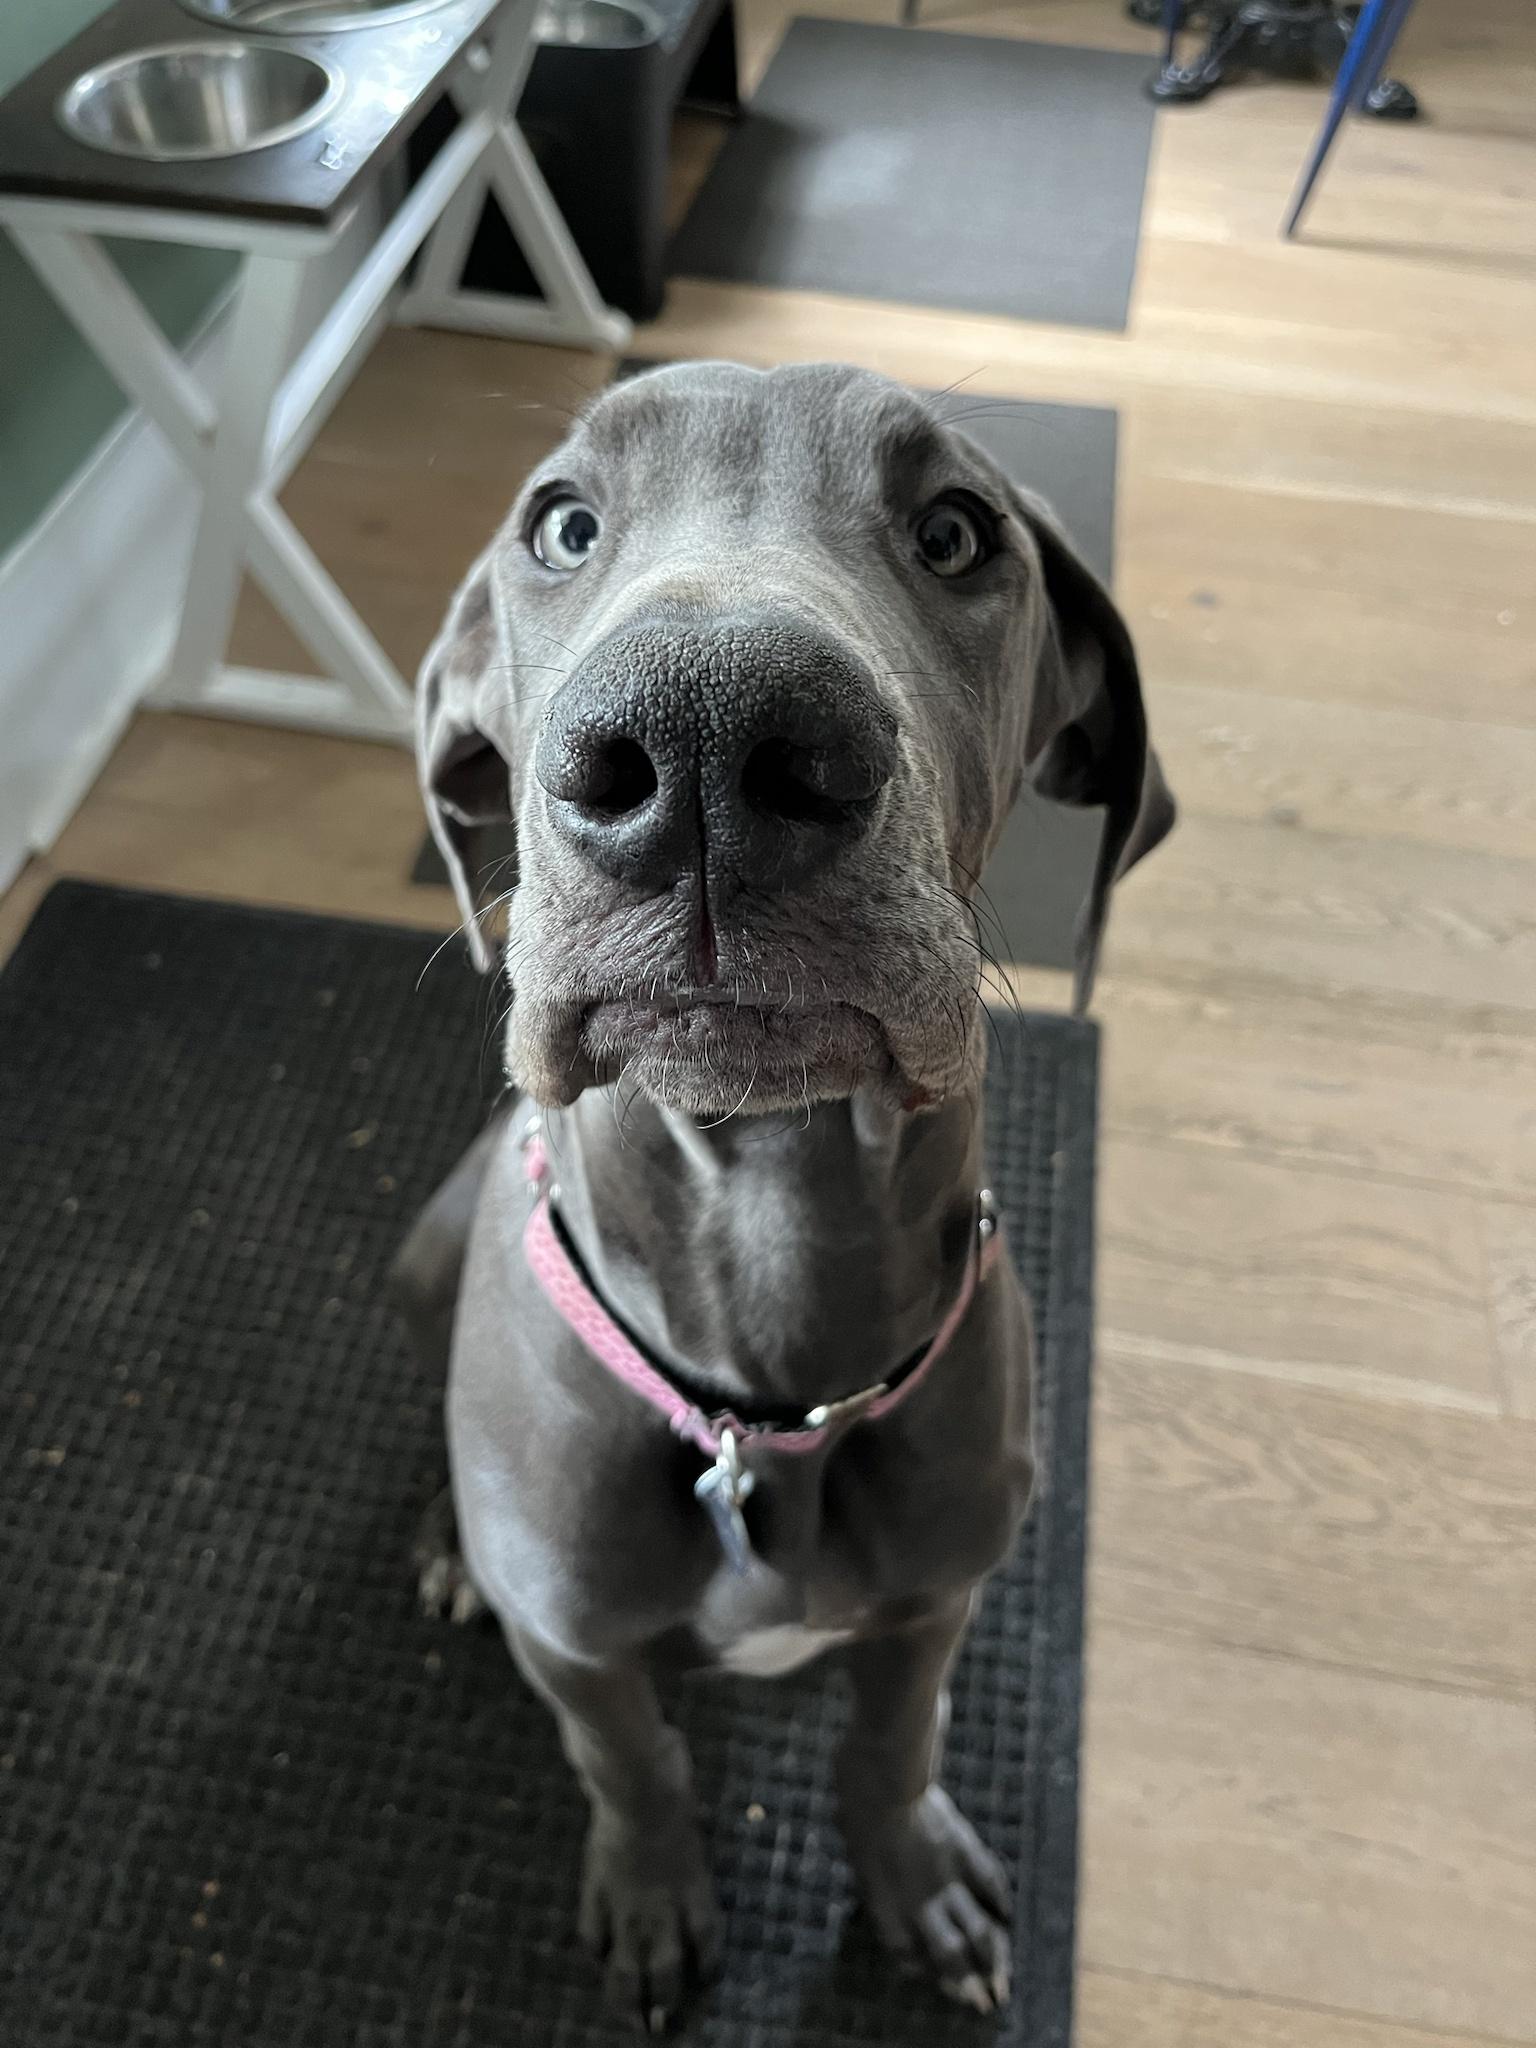 Her big brother went to puppy day care and he or she couldn’t trail, so she made this face